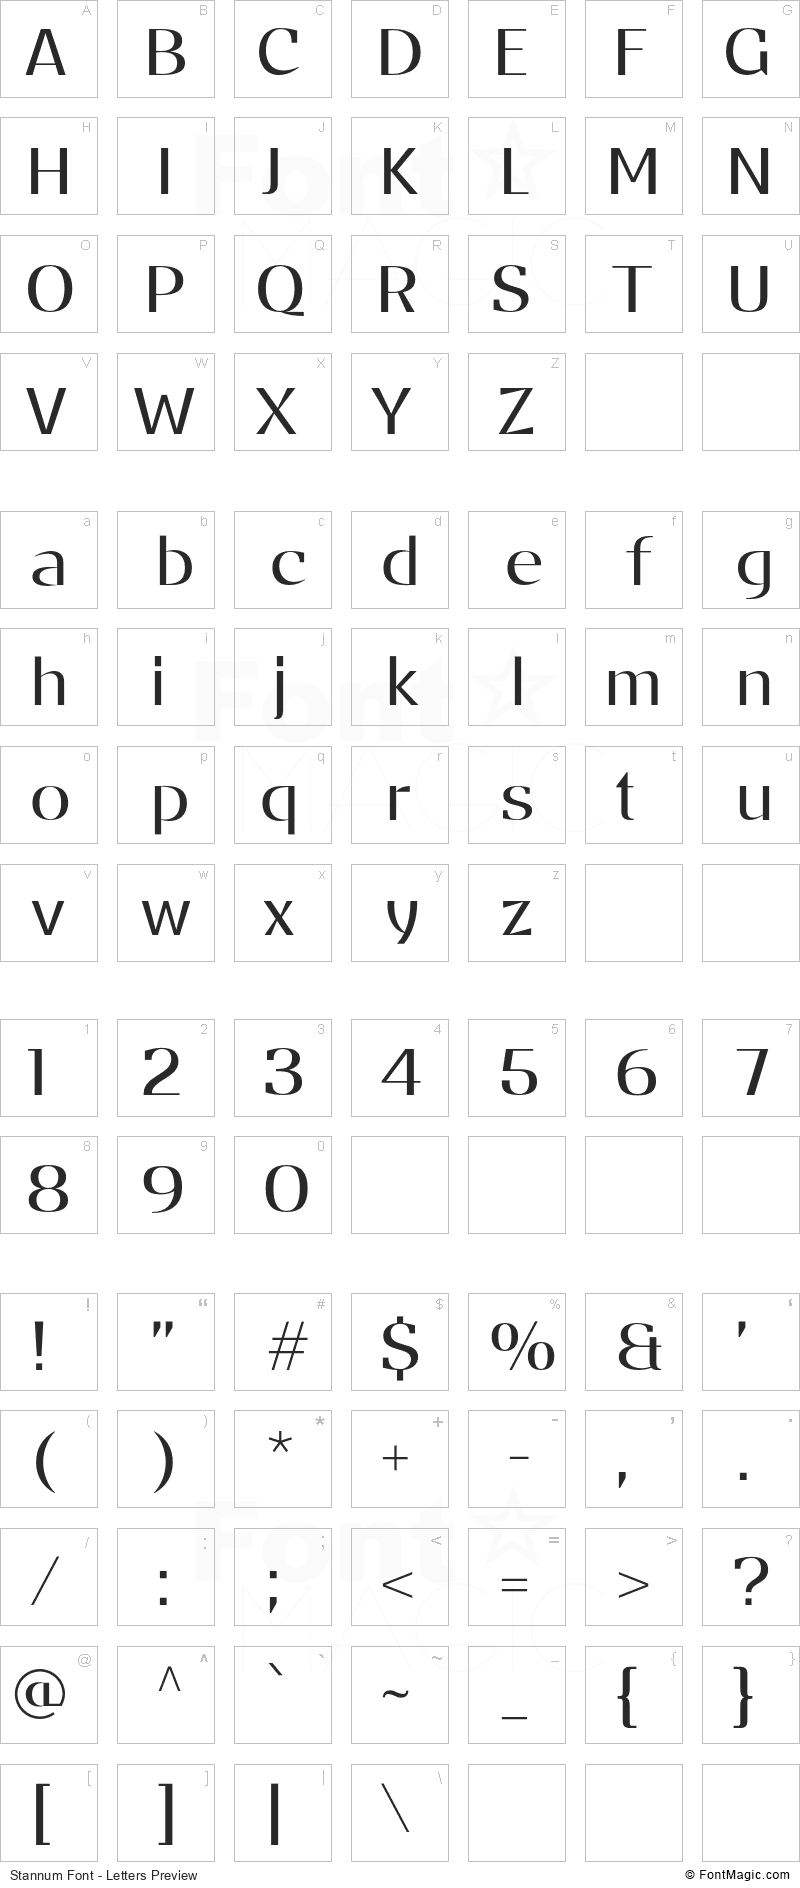 Stannum Font - All Latters Preview Chart